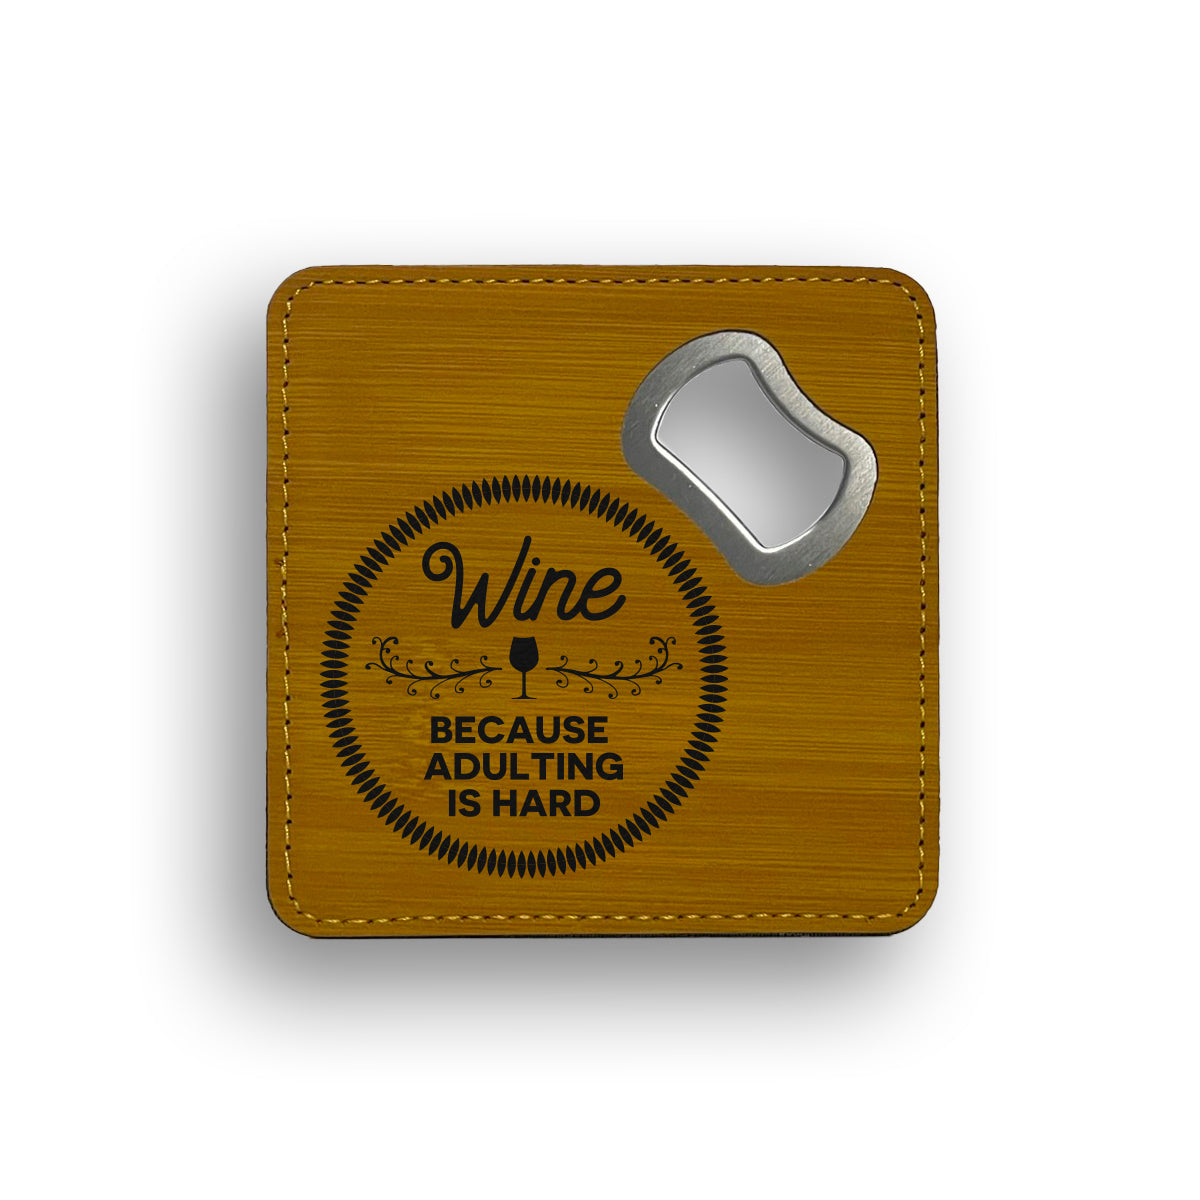 Wine Because Adulting Is Hard Bottle Opener Coaster